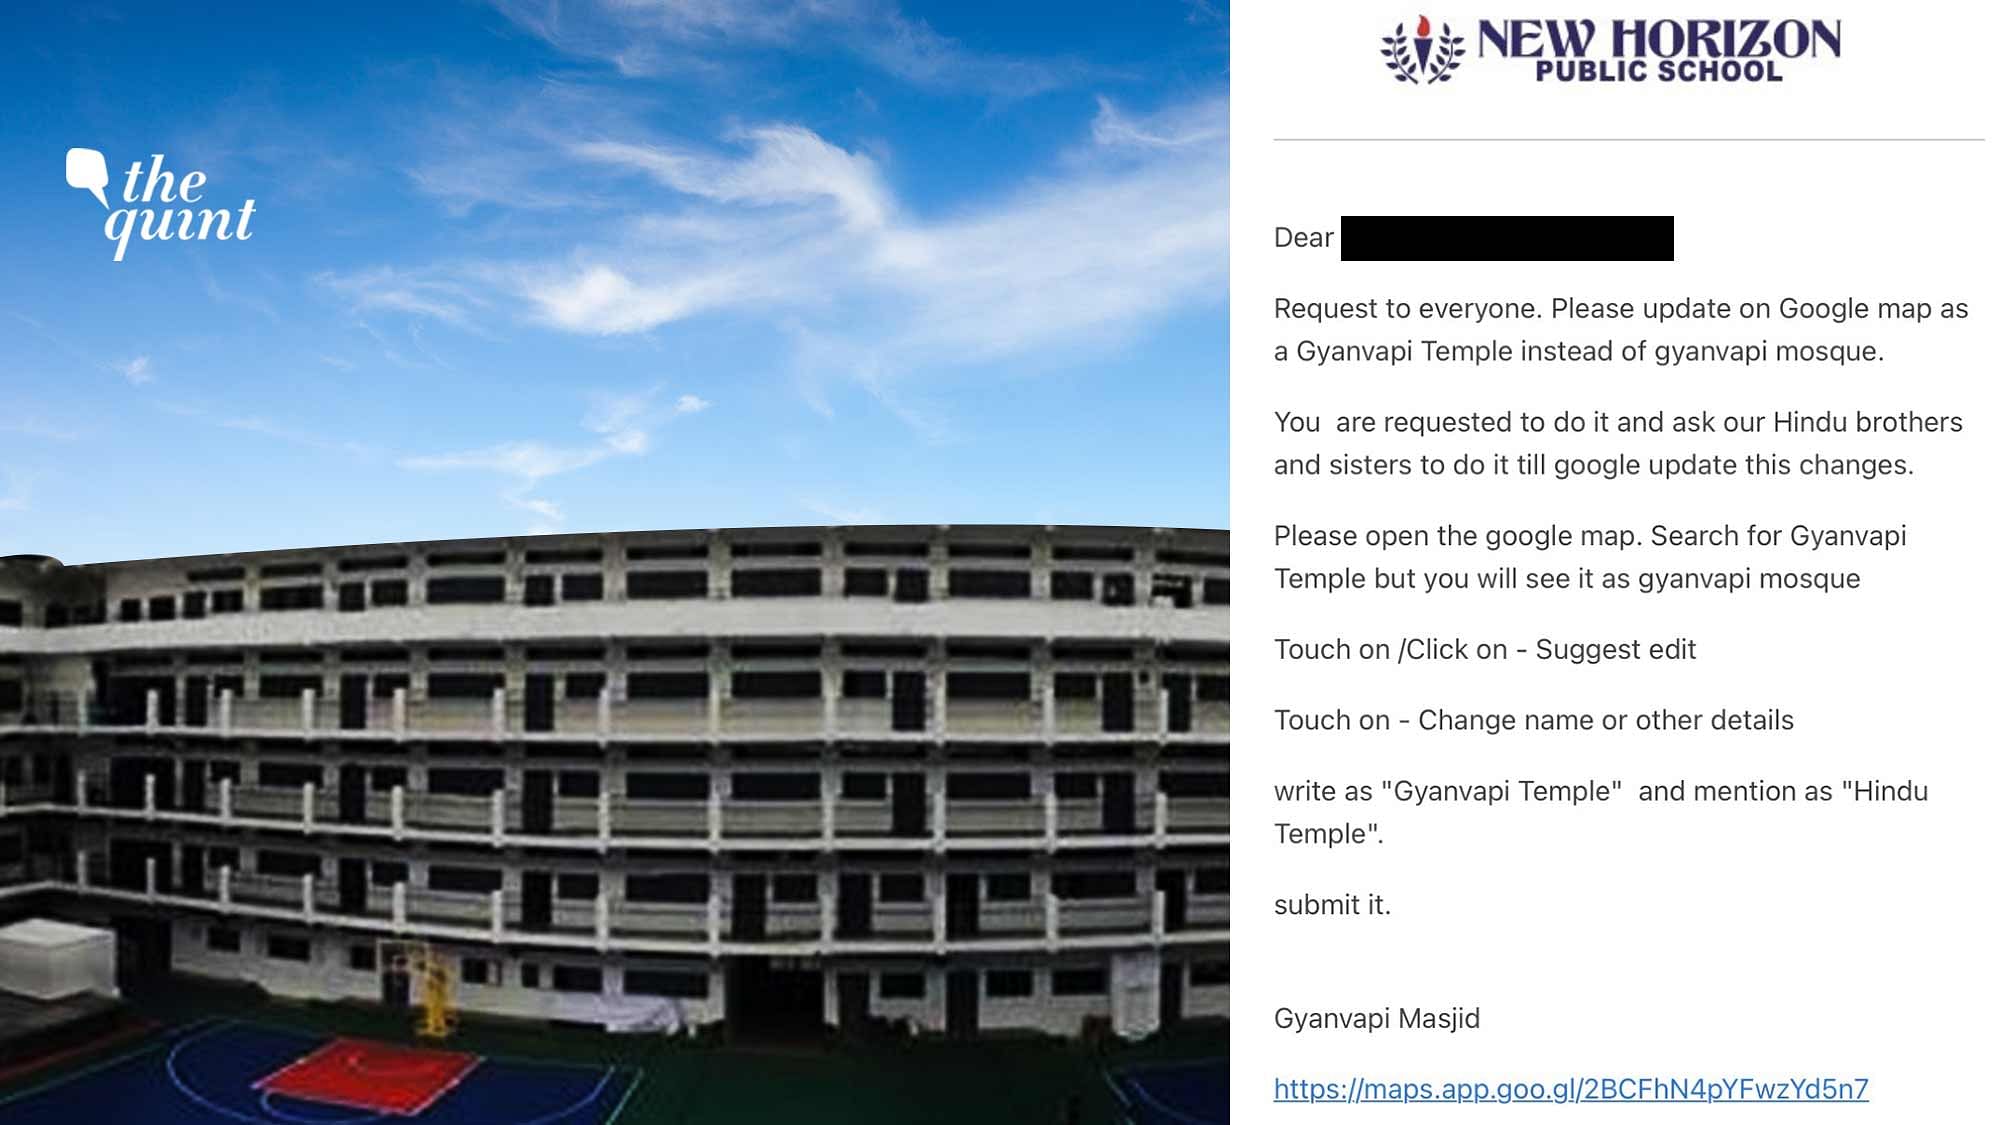 <div class="paragraphs"><p>The New Horizon Public School in Bangalore has sent an email to its alumni asking for them to change 'Gyanvapi mosque' to 'Gyanvapi temple' on Google maps. </p></div>